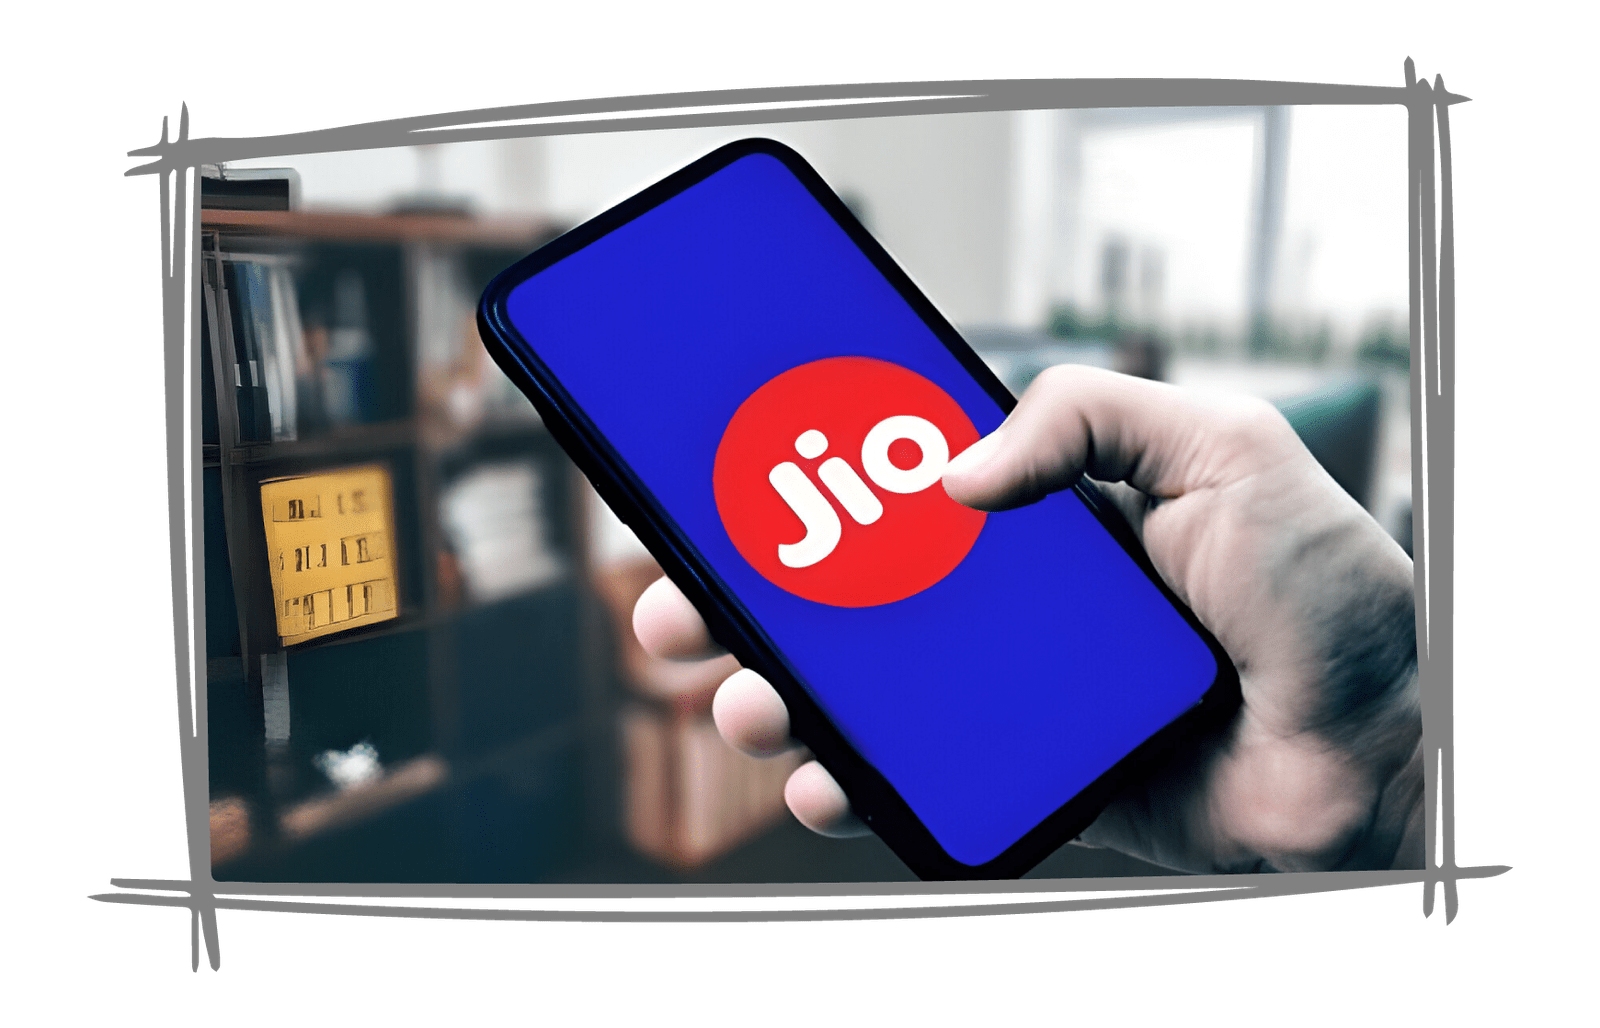 Strong Brand Identities of Jio in telecom industry